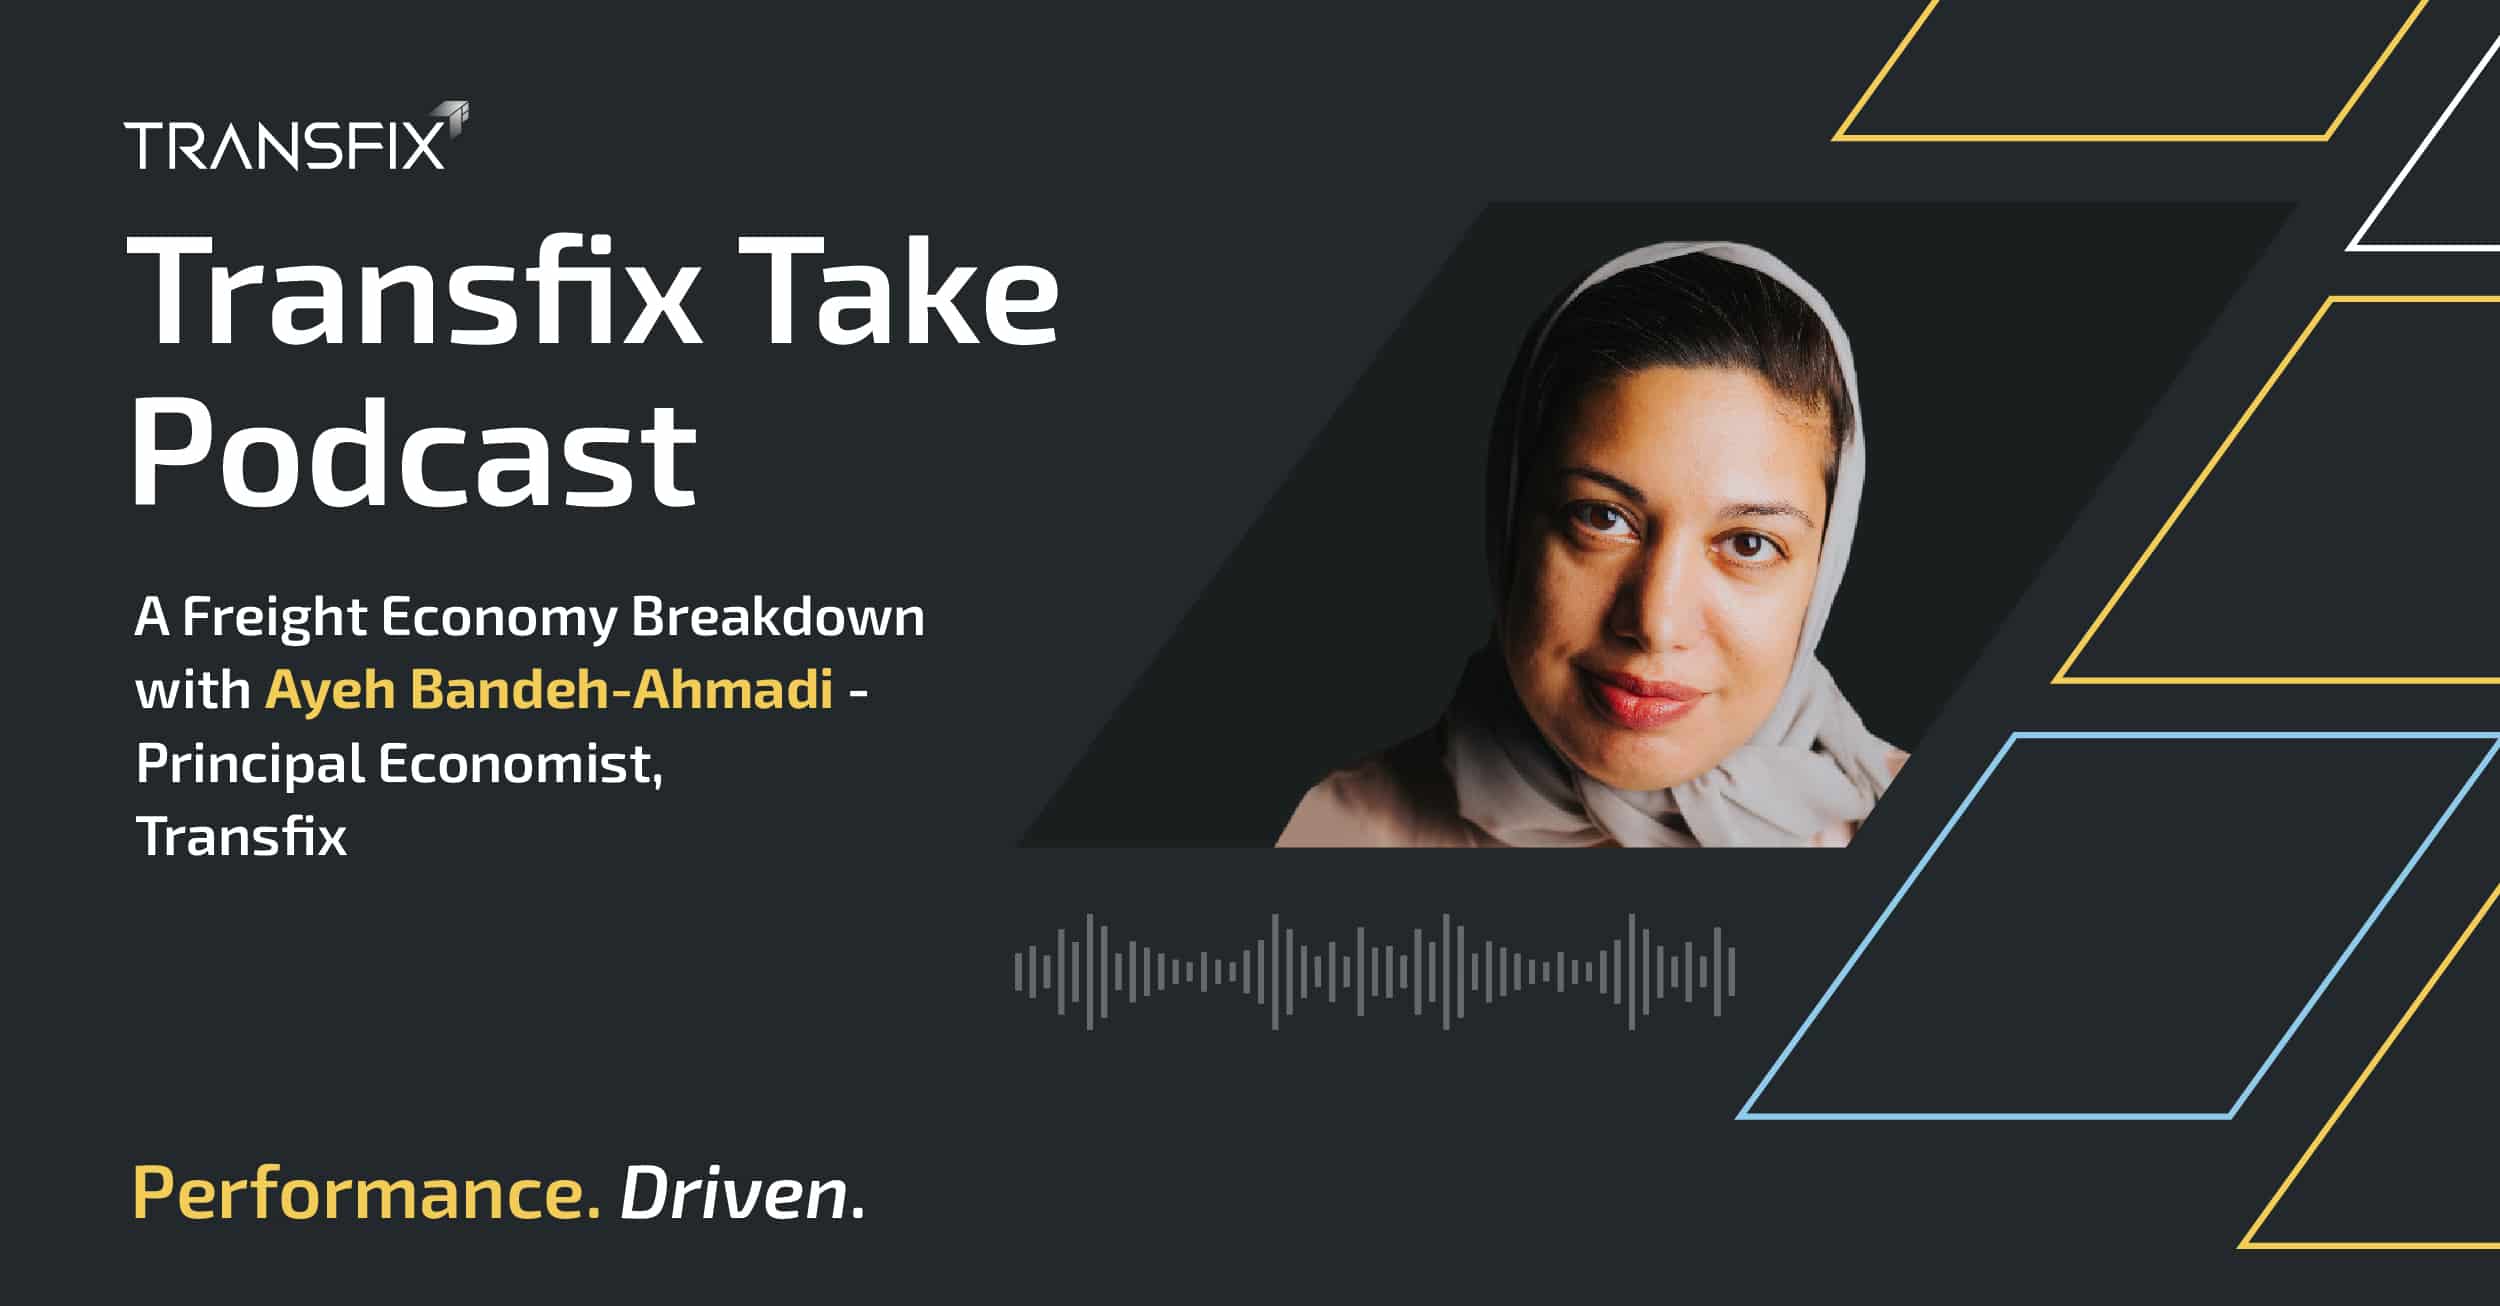 Ayeh Bandeh-Ahmadi, Principal Economist, Lends Observations to the Transfix Take Podcast